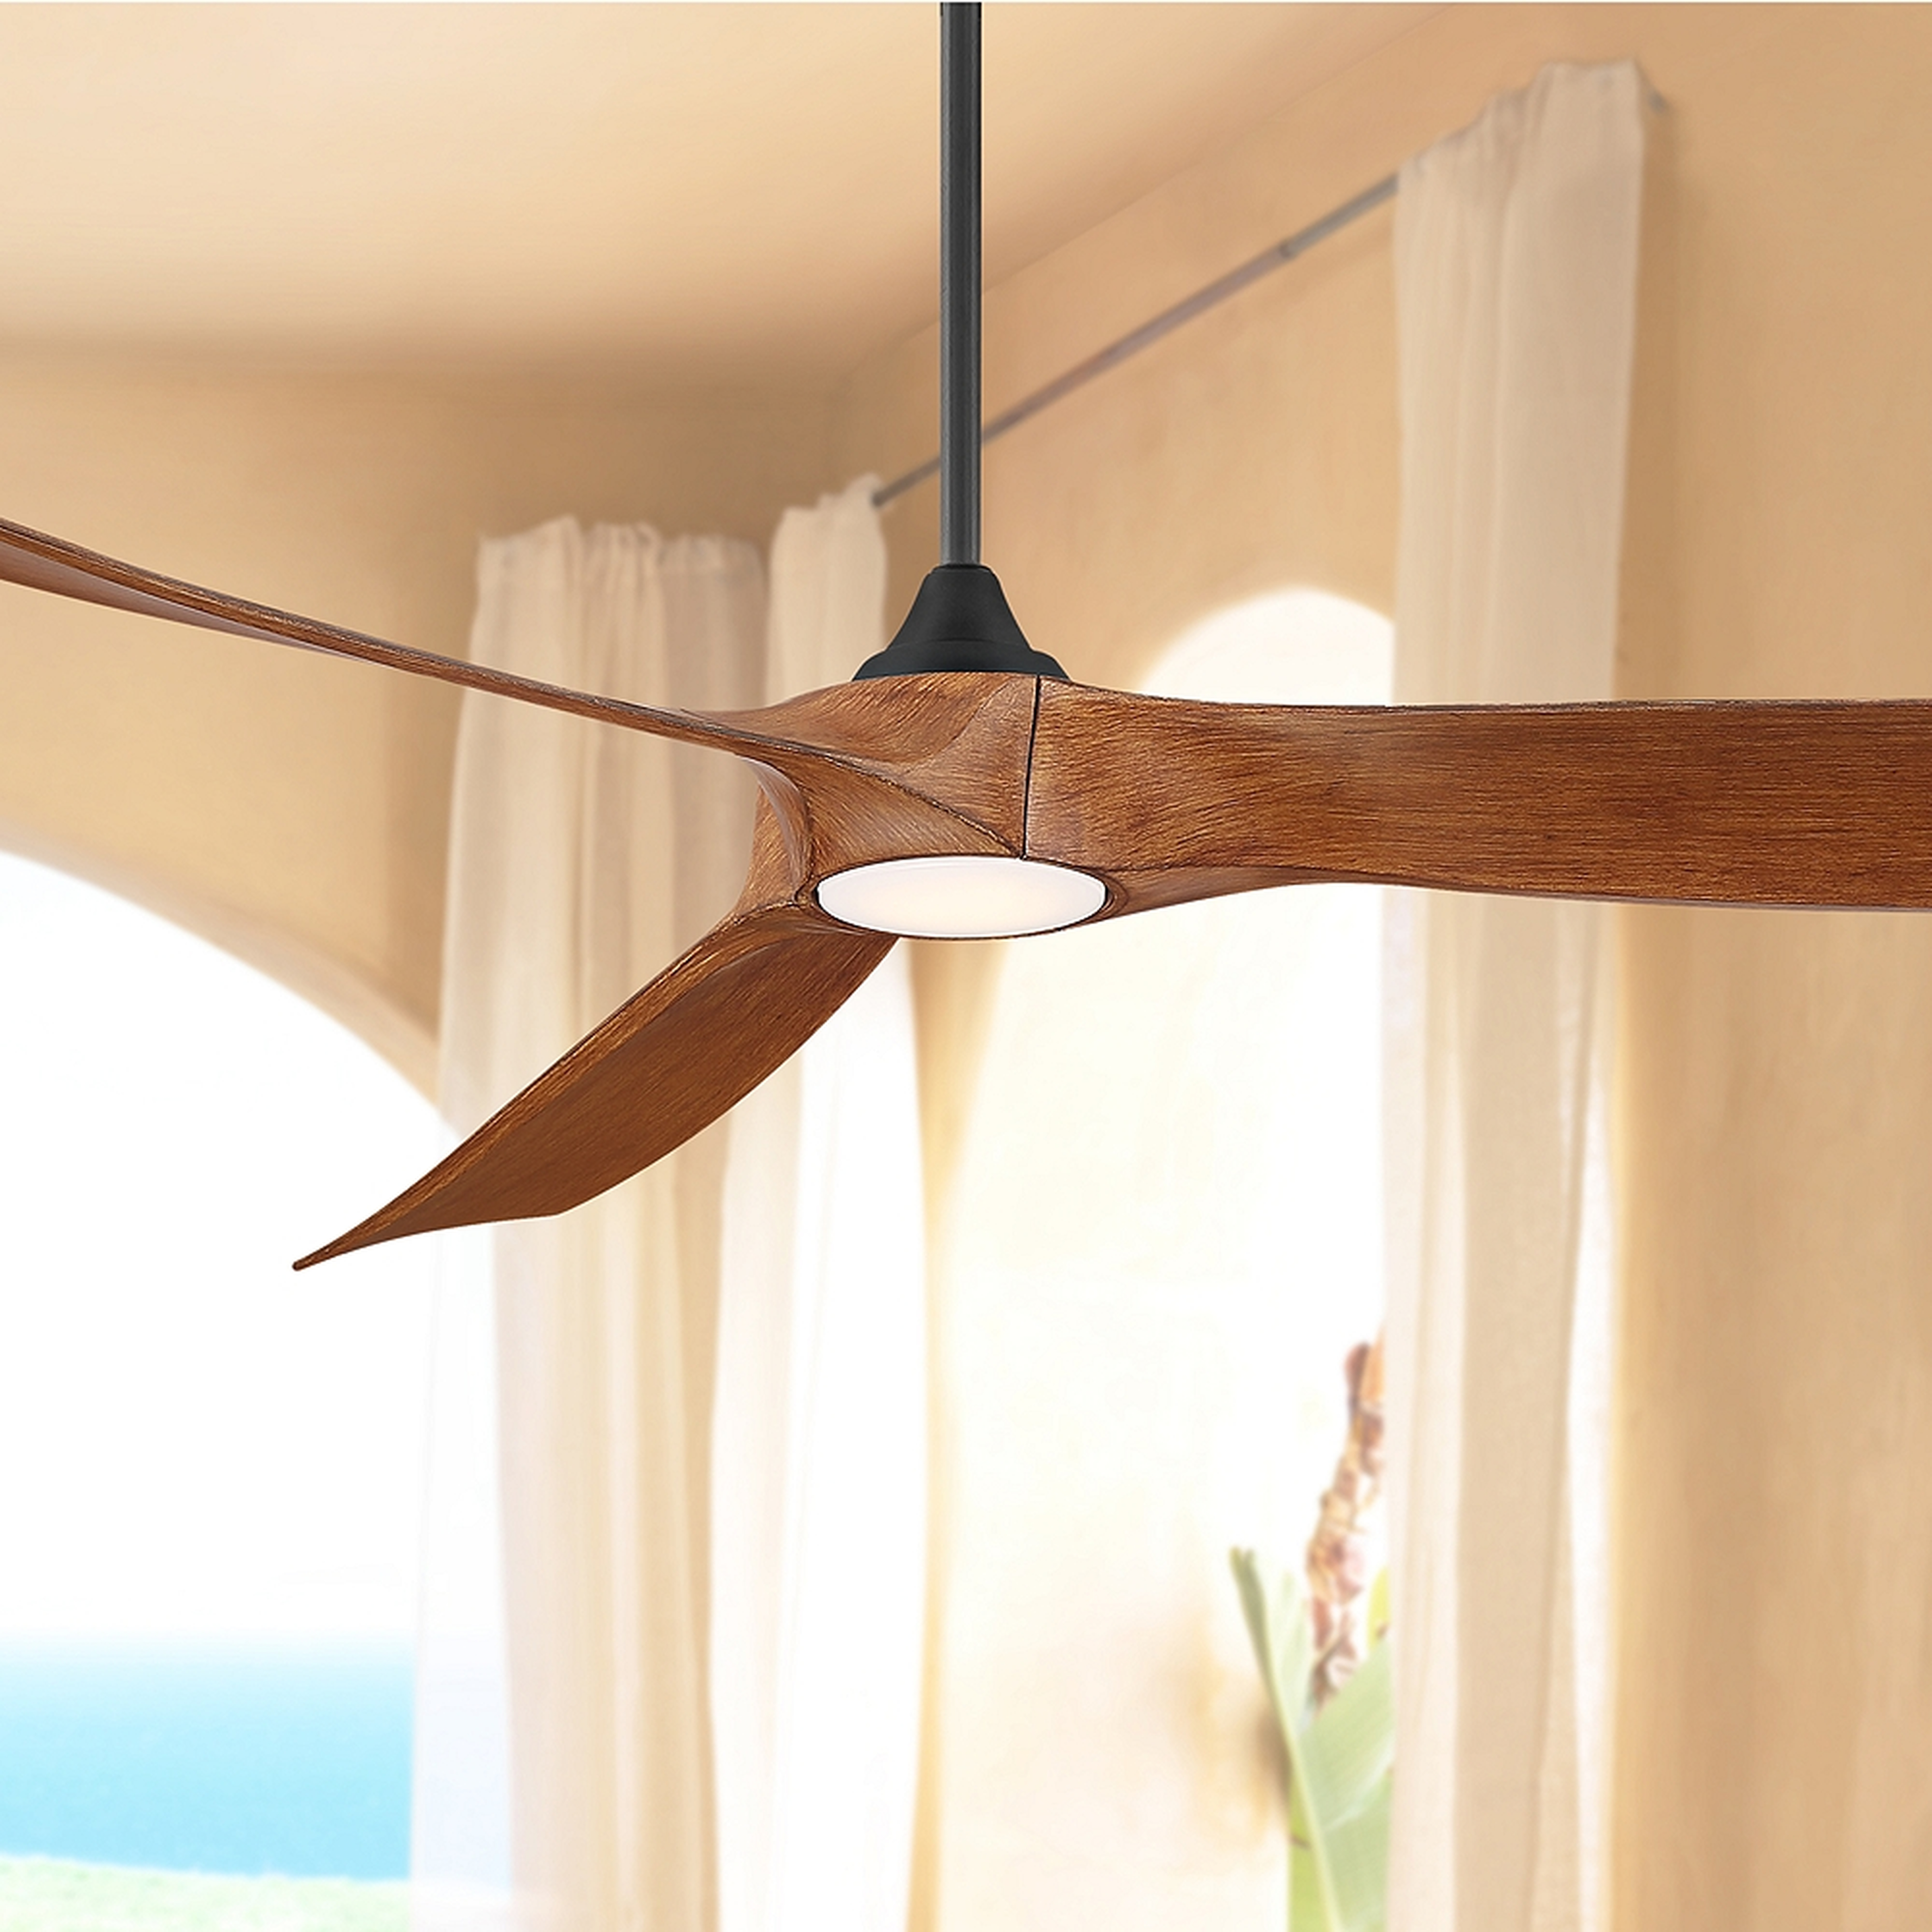 70" Kona Wind Black and Koa Damp Rated LED DC Ceiling Fan - Style # 79D81 - Lamps Plus